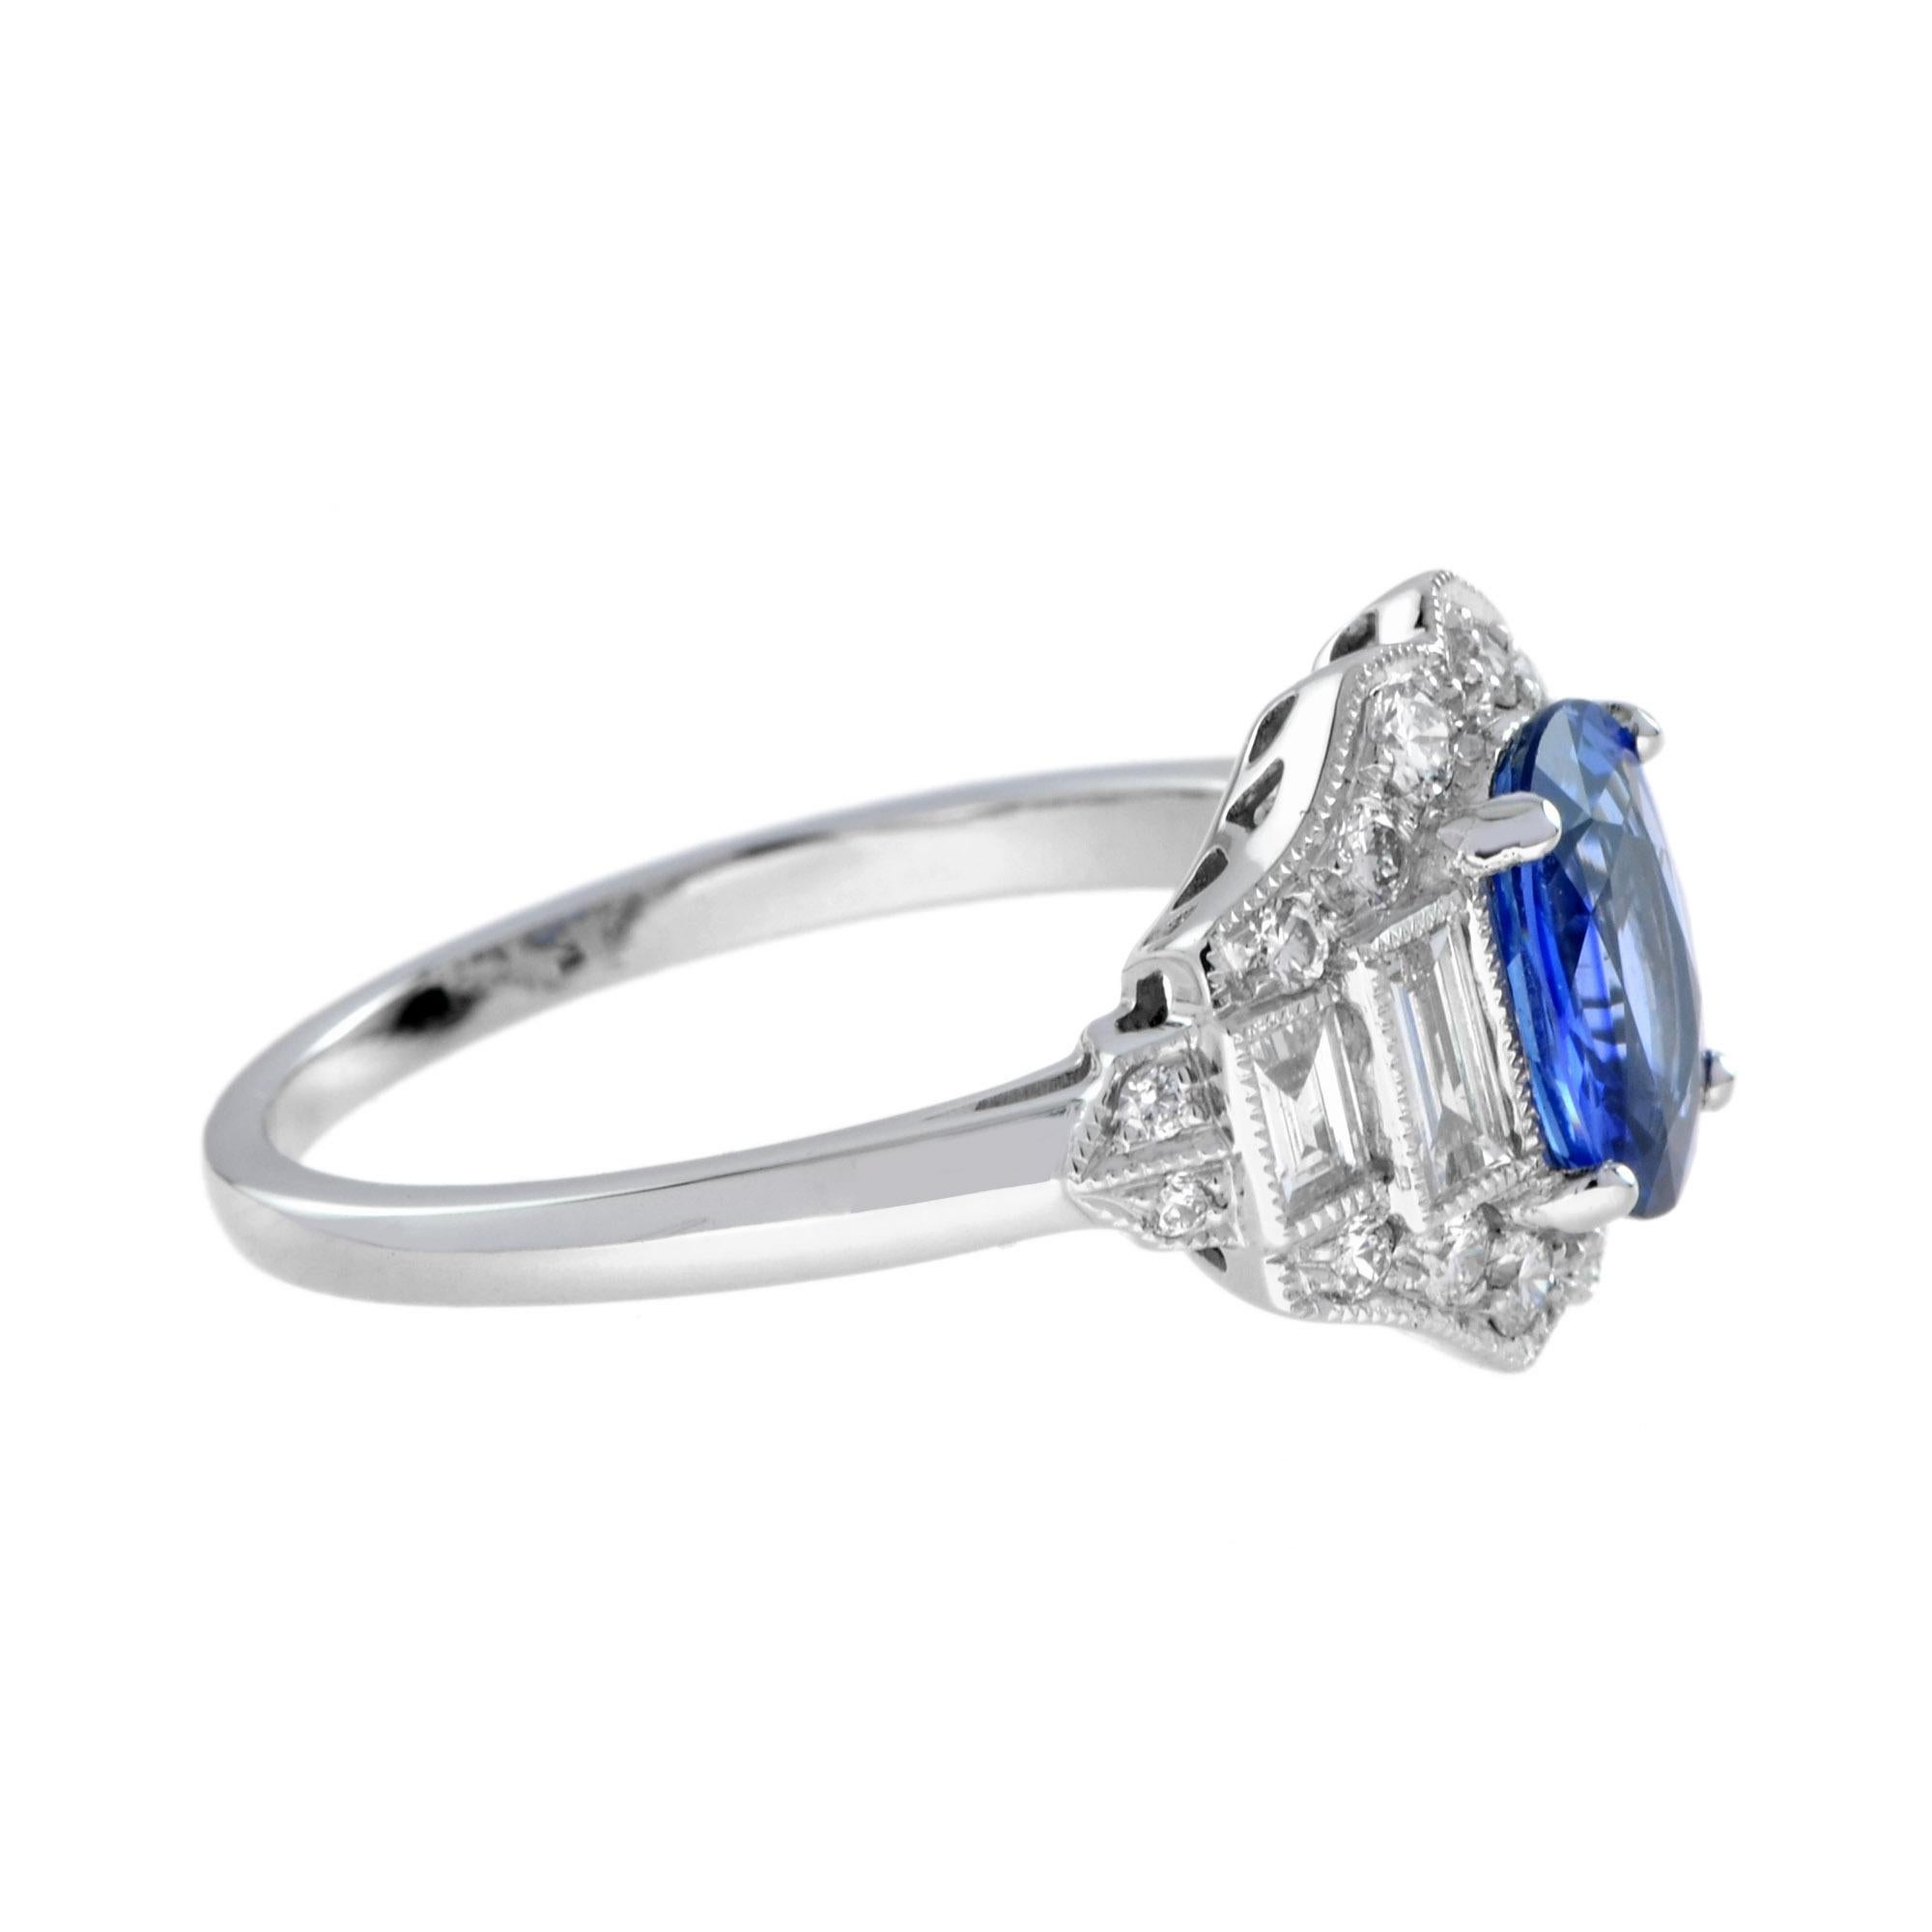 Ceylon Sapphire and Diamond Art Deco Style Engagement Ring in 18k White Gold 1